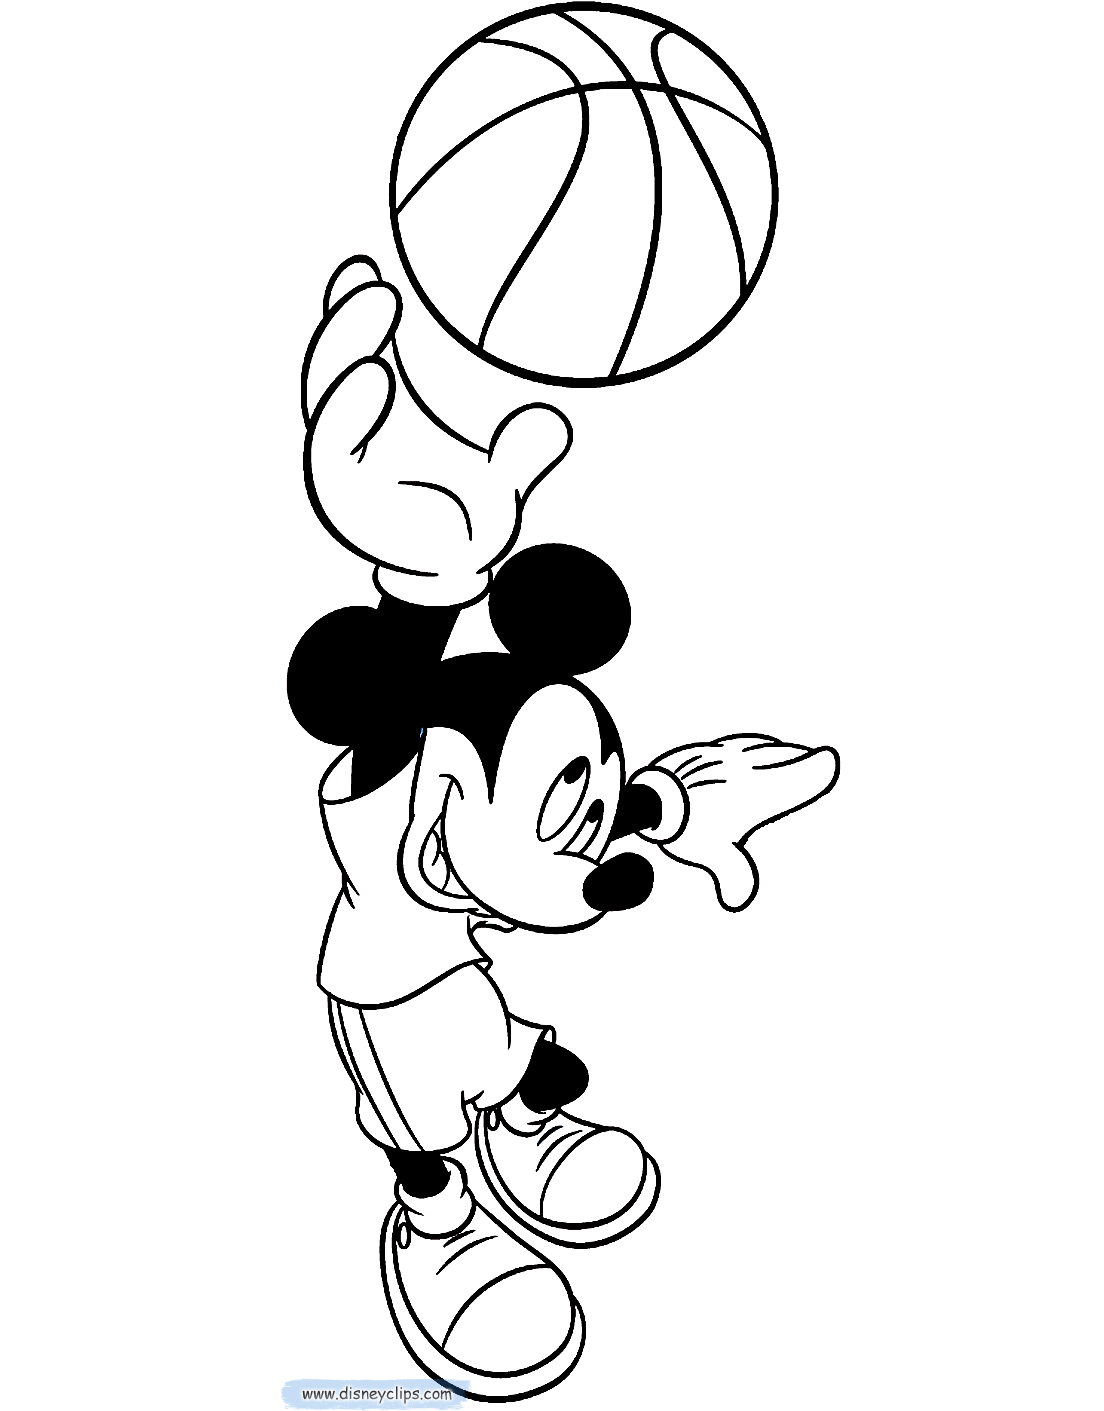 Mickey Mouse Coloring Pages 3 | Disney Coloring Book